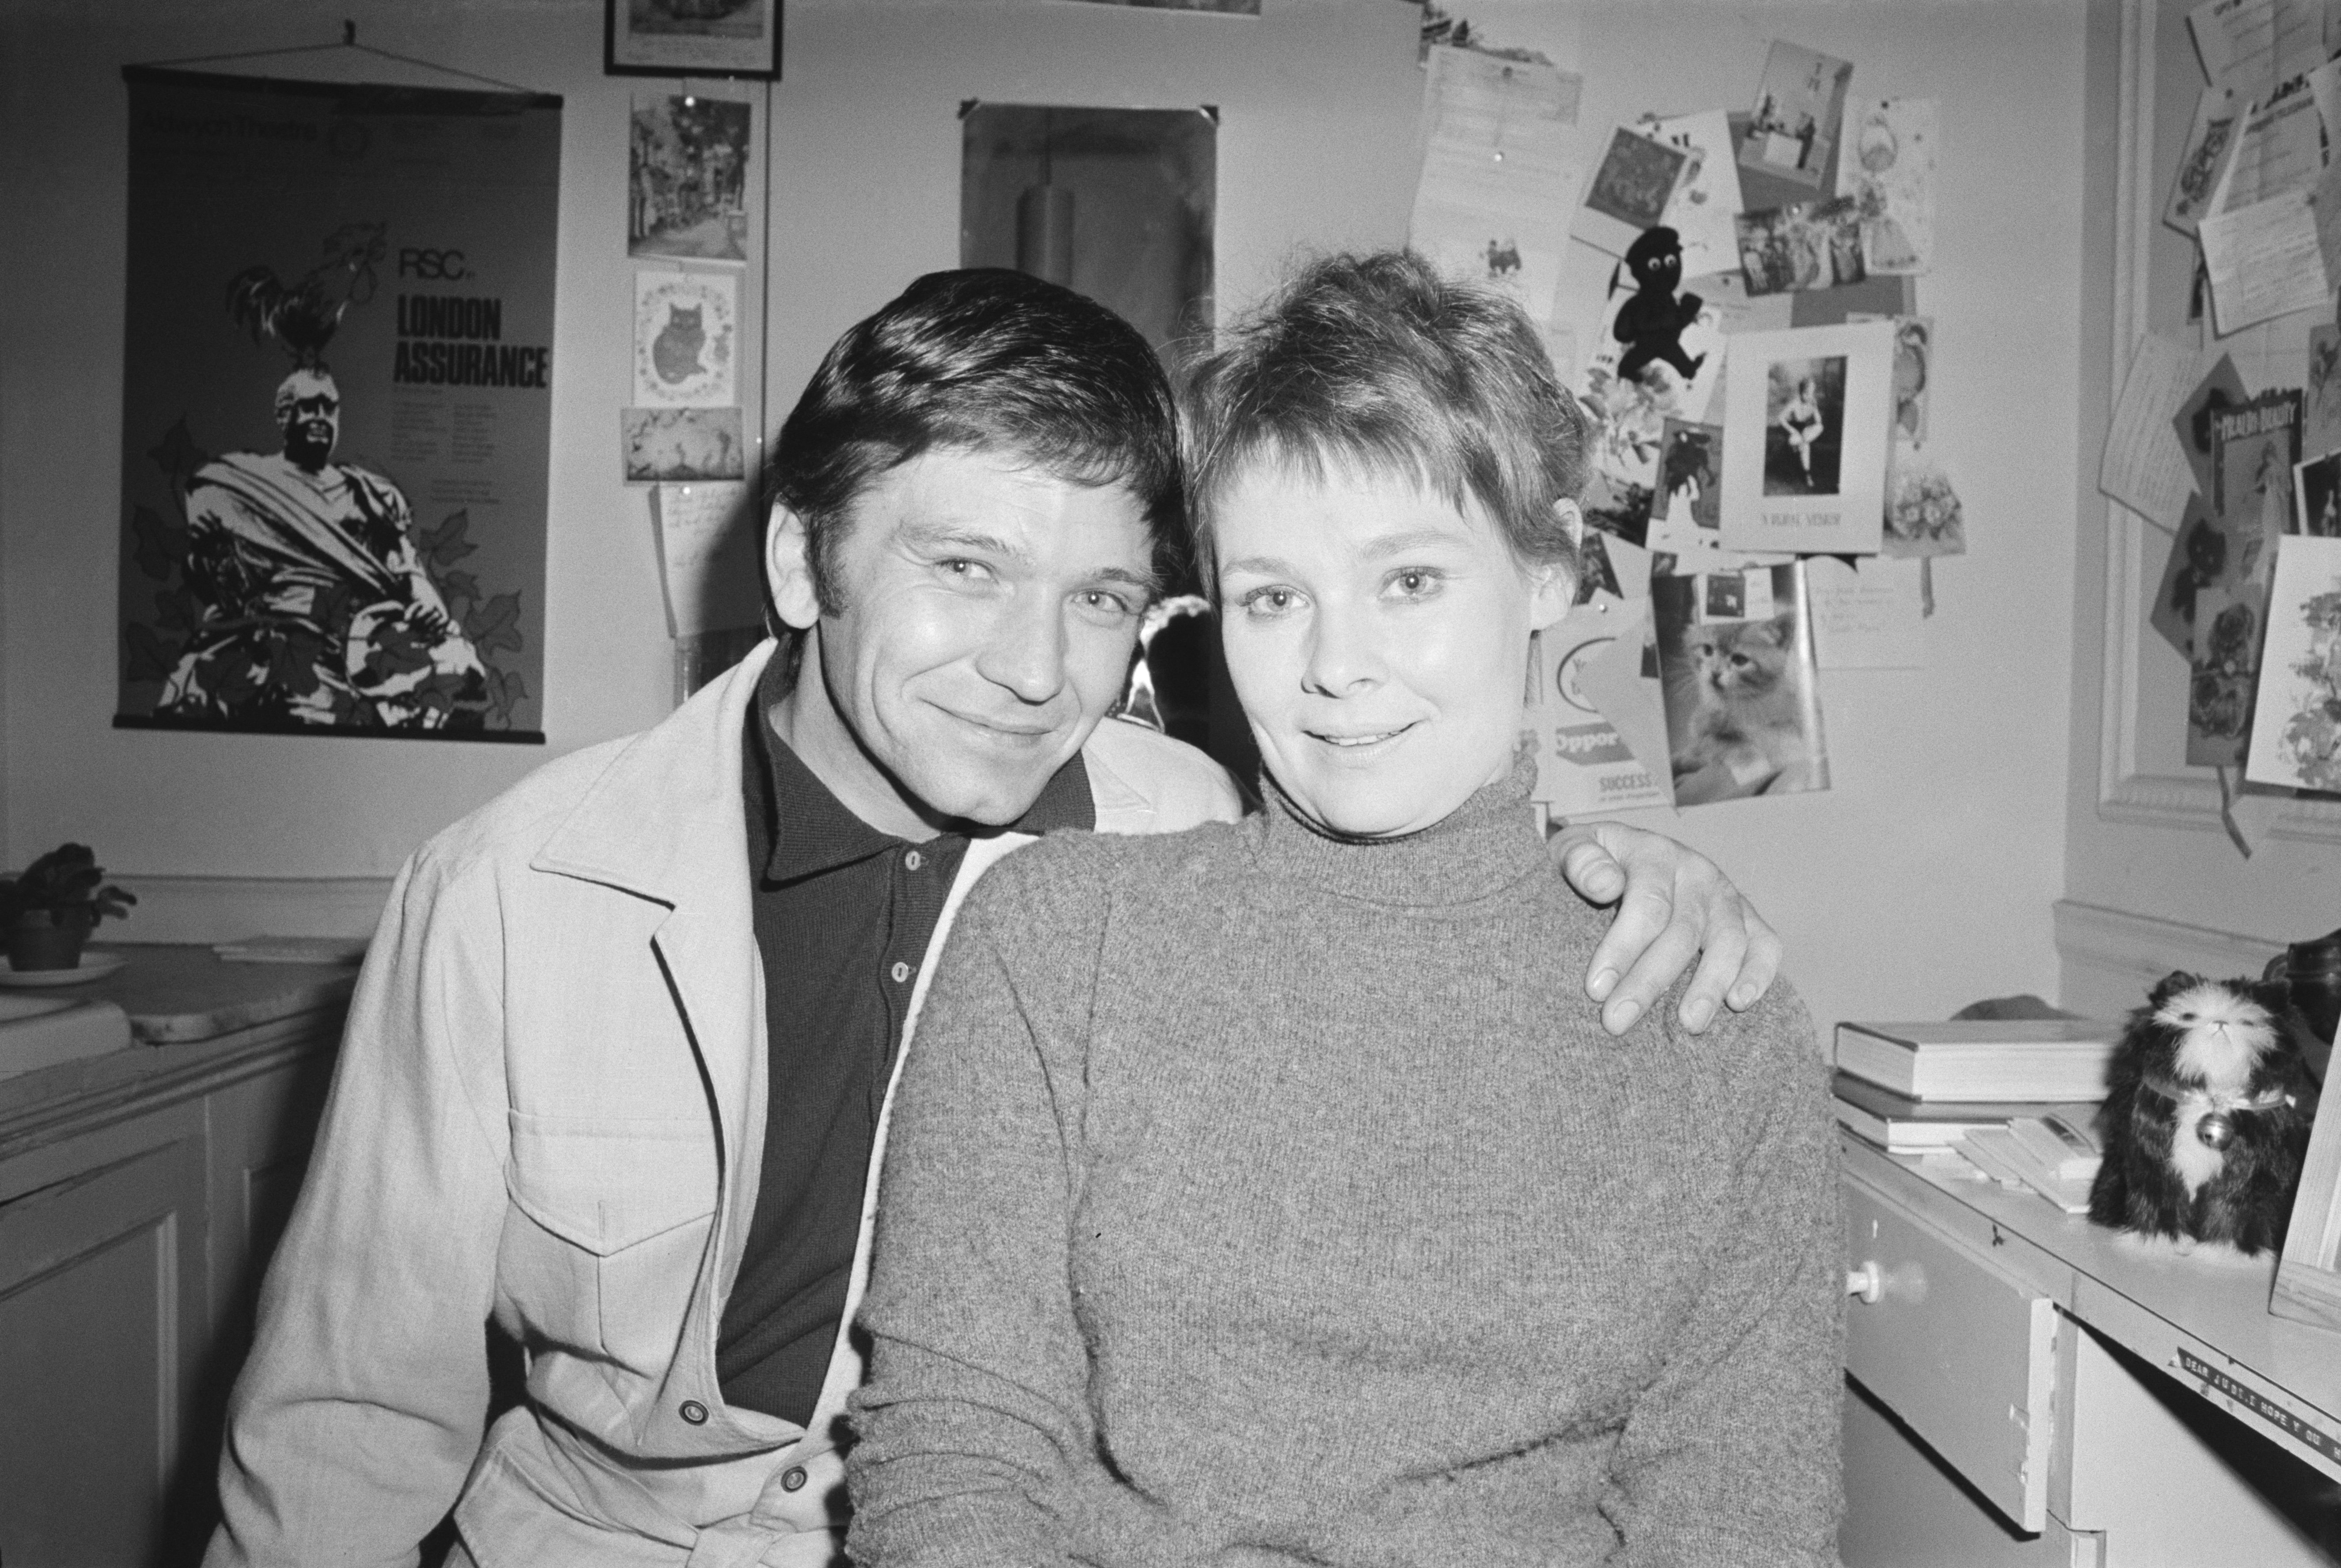 Judi Dench and Michael Williams in London on October 23, 1970 | Source: Getty Images